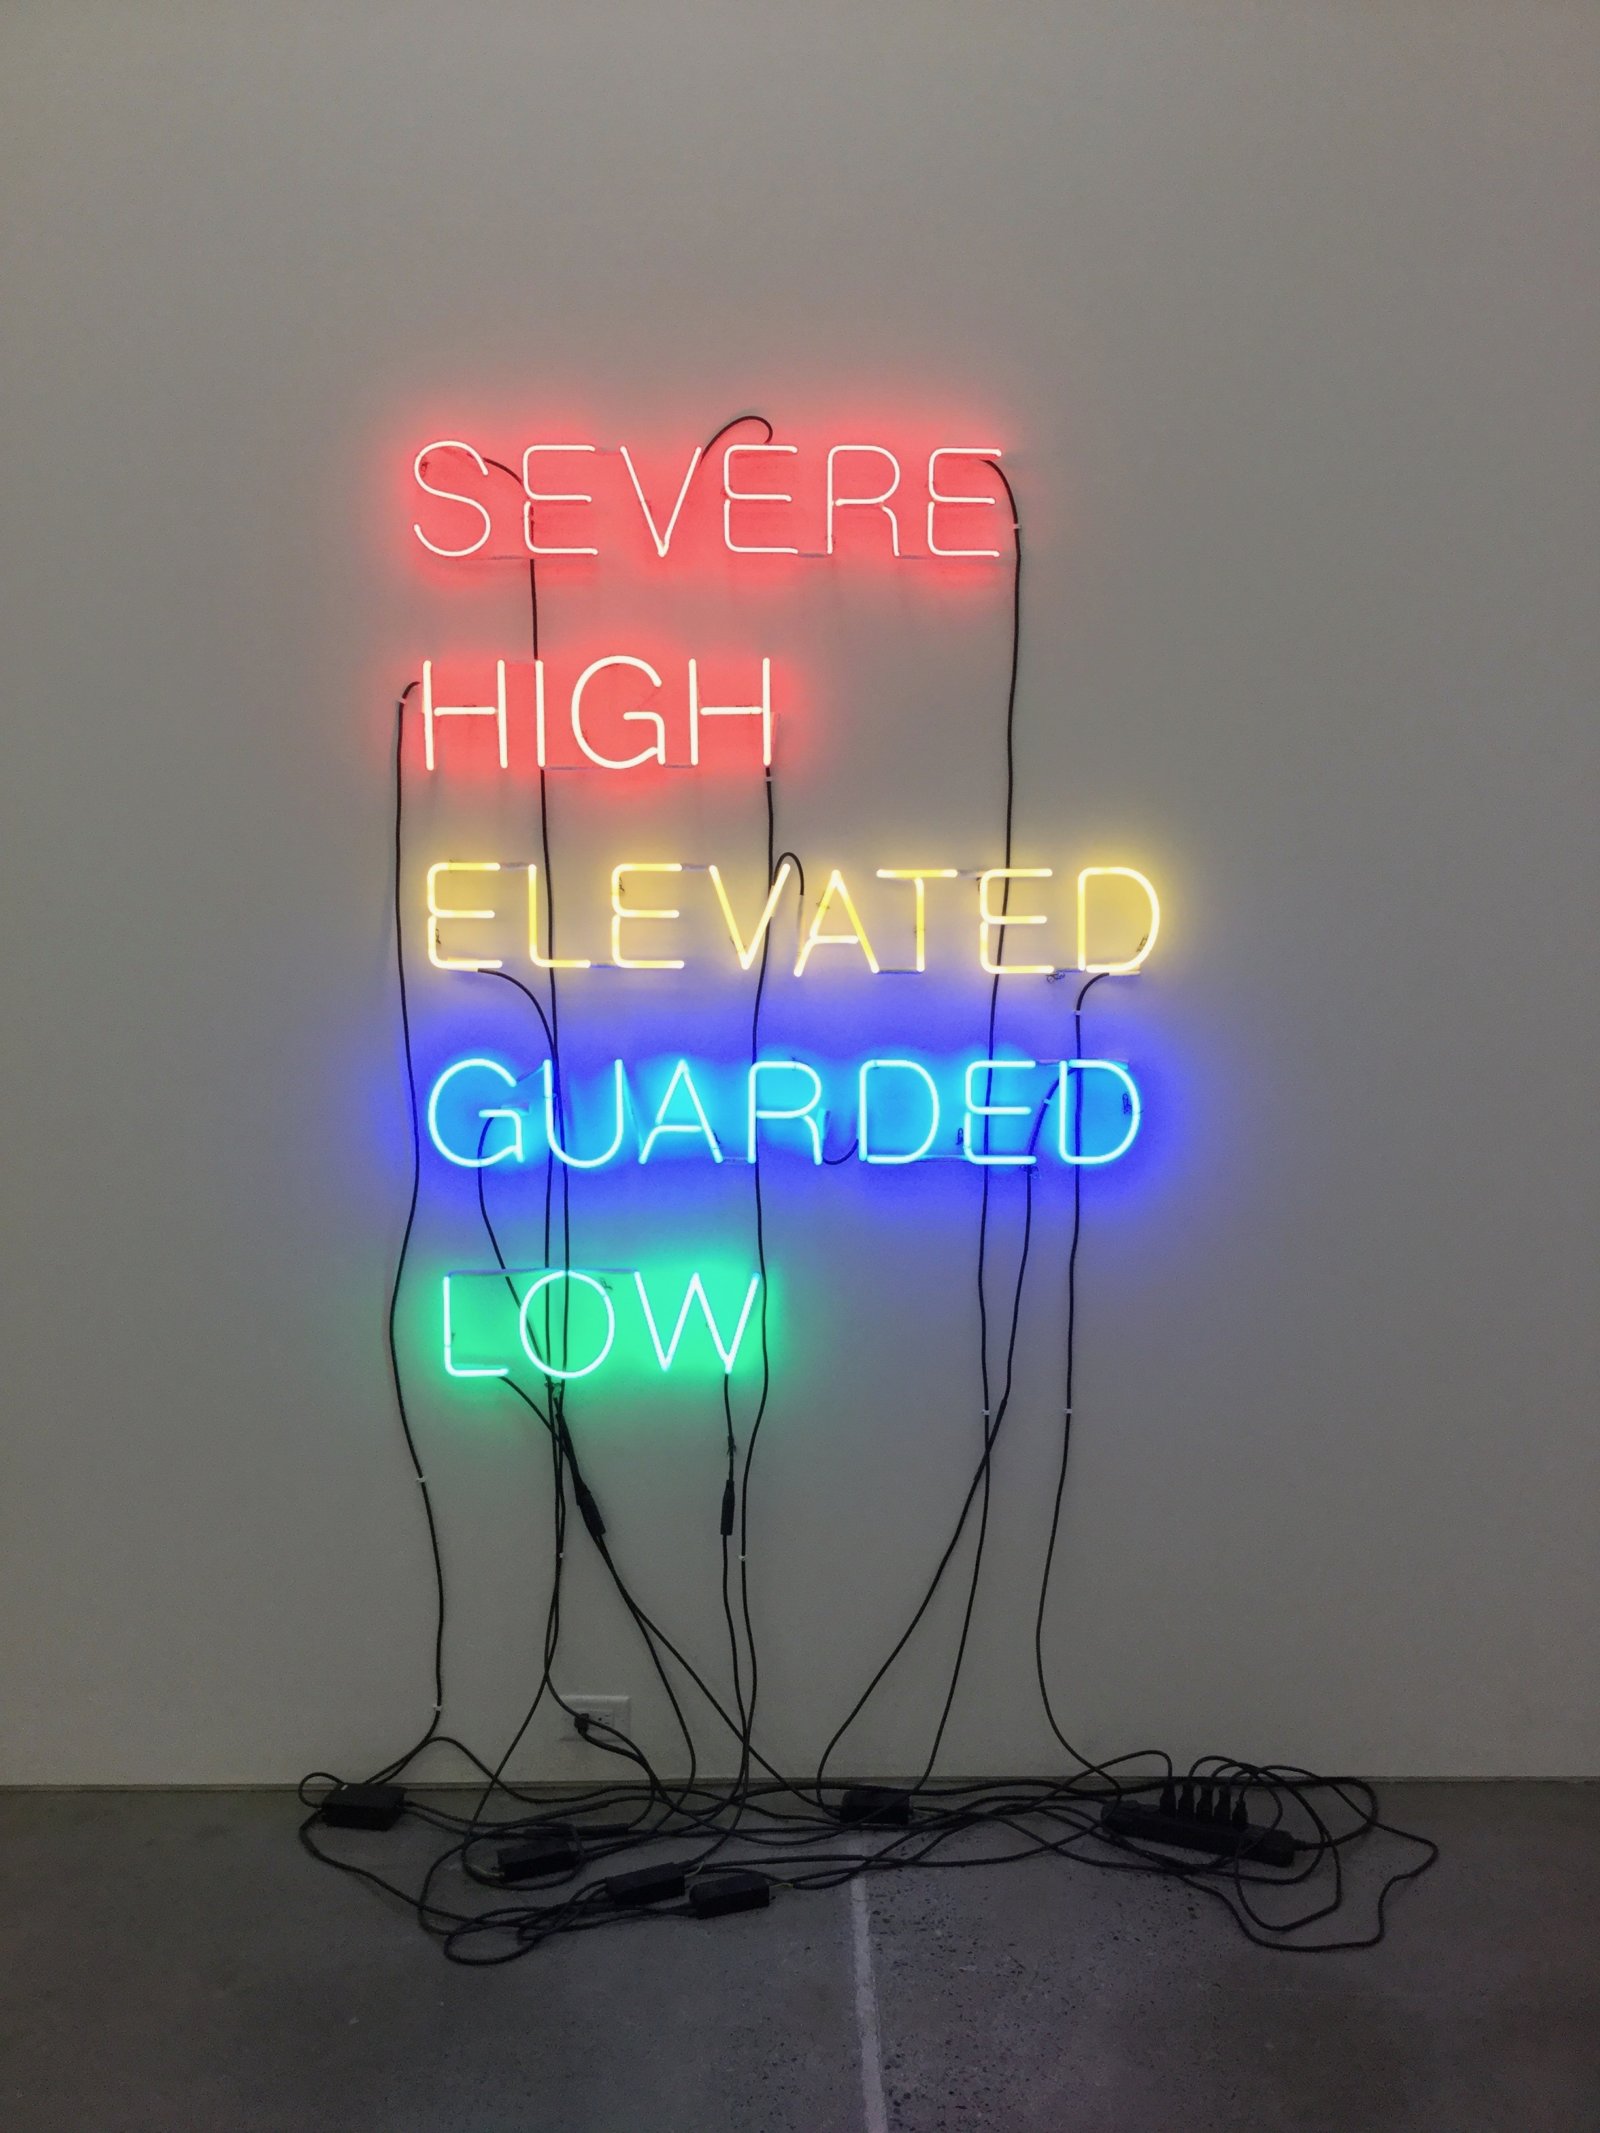 Ron Terada, Five Words in Coloured Neon, 2003, red, orange, yellow, blue and green neon, 67 x 50 x 3 in. (170 x 127 x 8 cm)